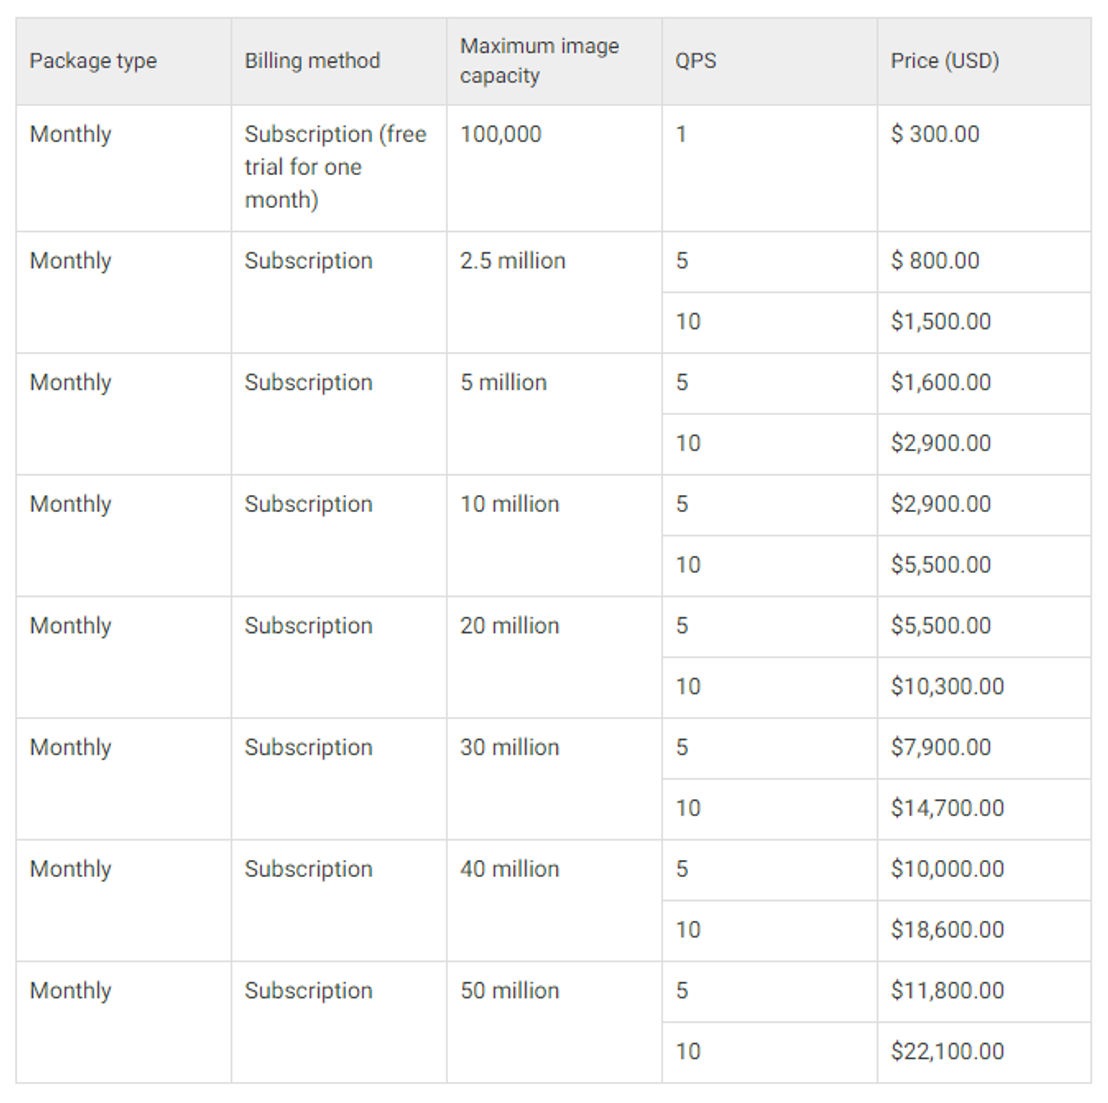 Alibaba Image Search Pricing